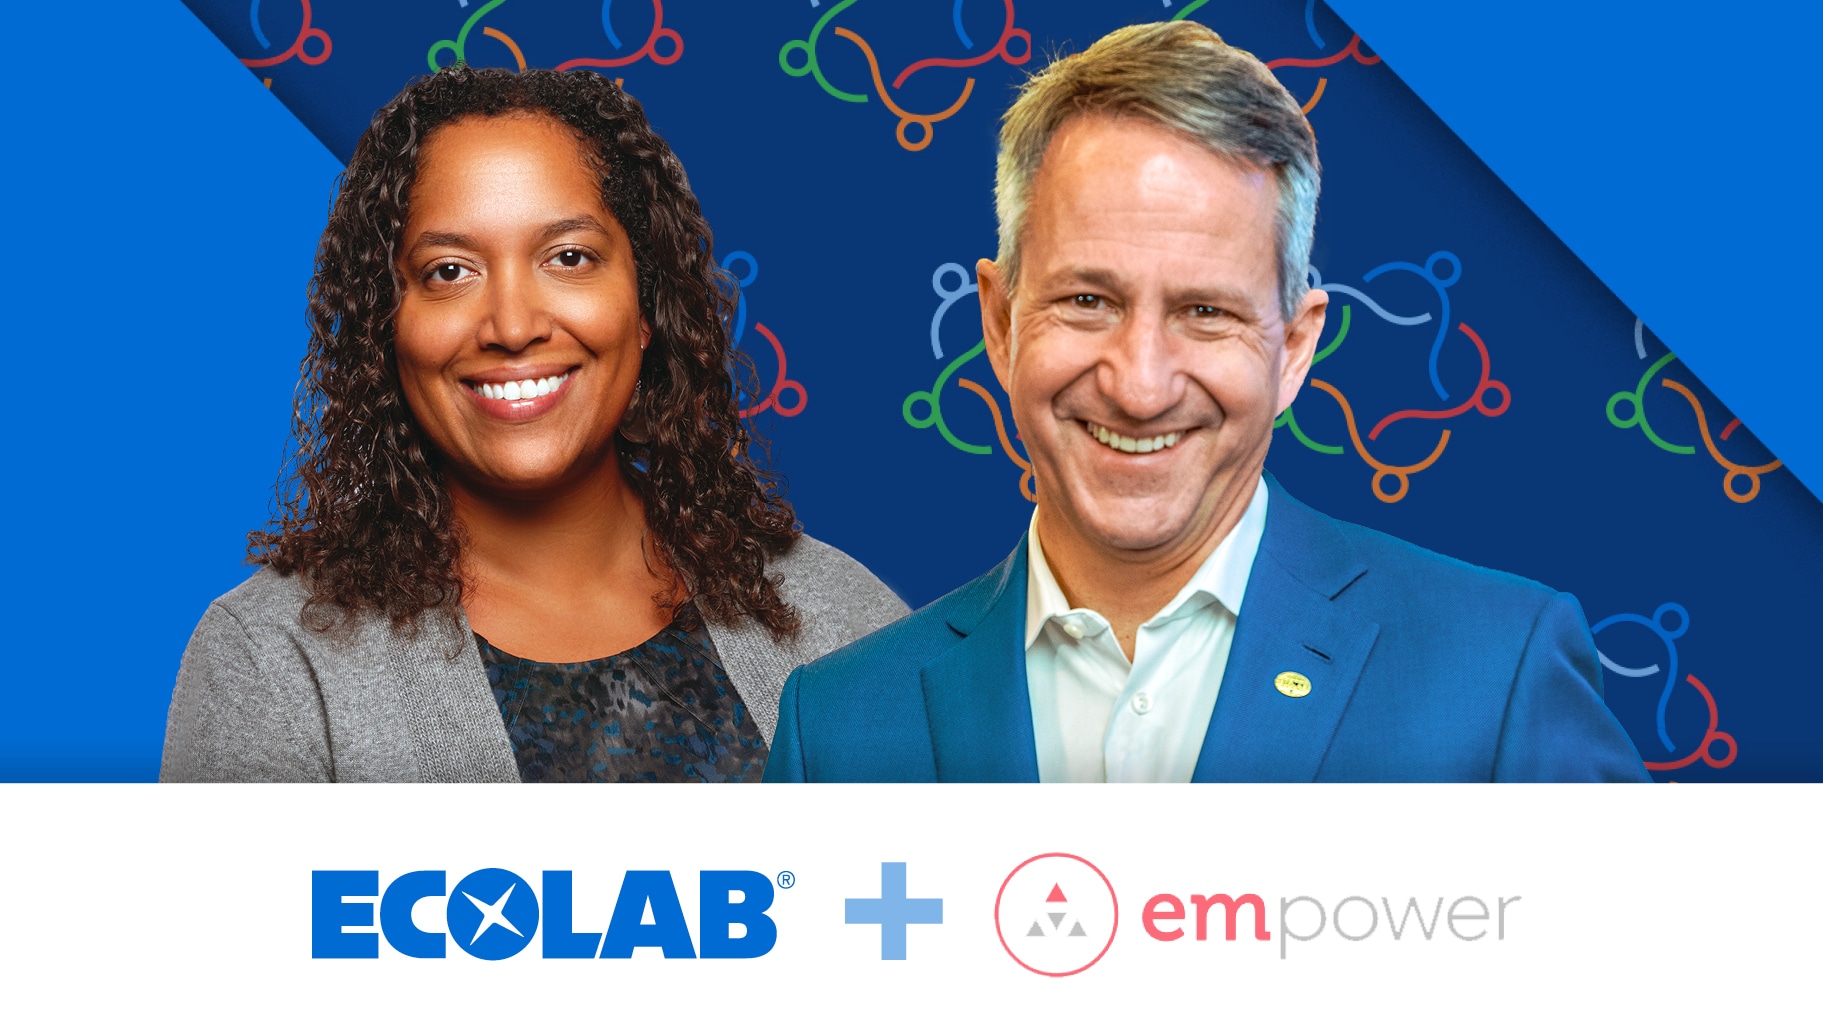 INvolve’s 2023 Empower Role Model List recipients, Ecolab’s Chairman and CEO Christophe Beck and Chief Marketing Officer Gail Peterson